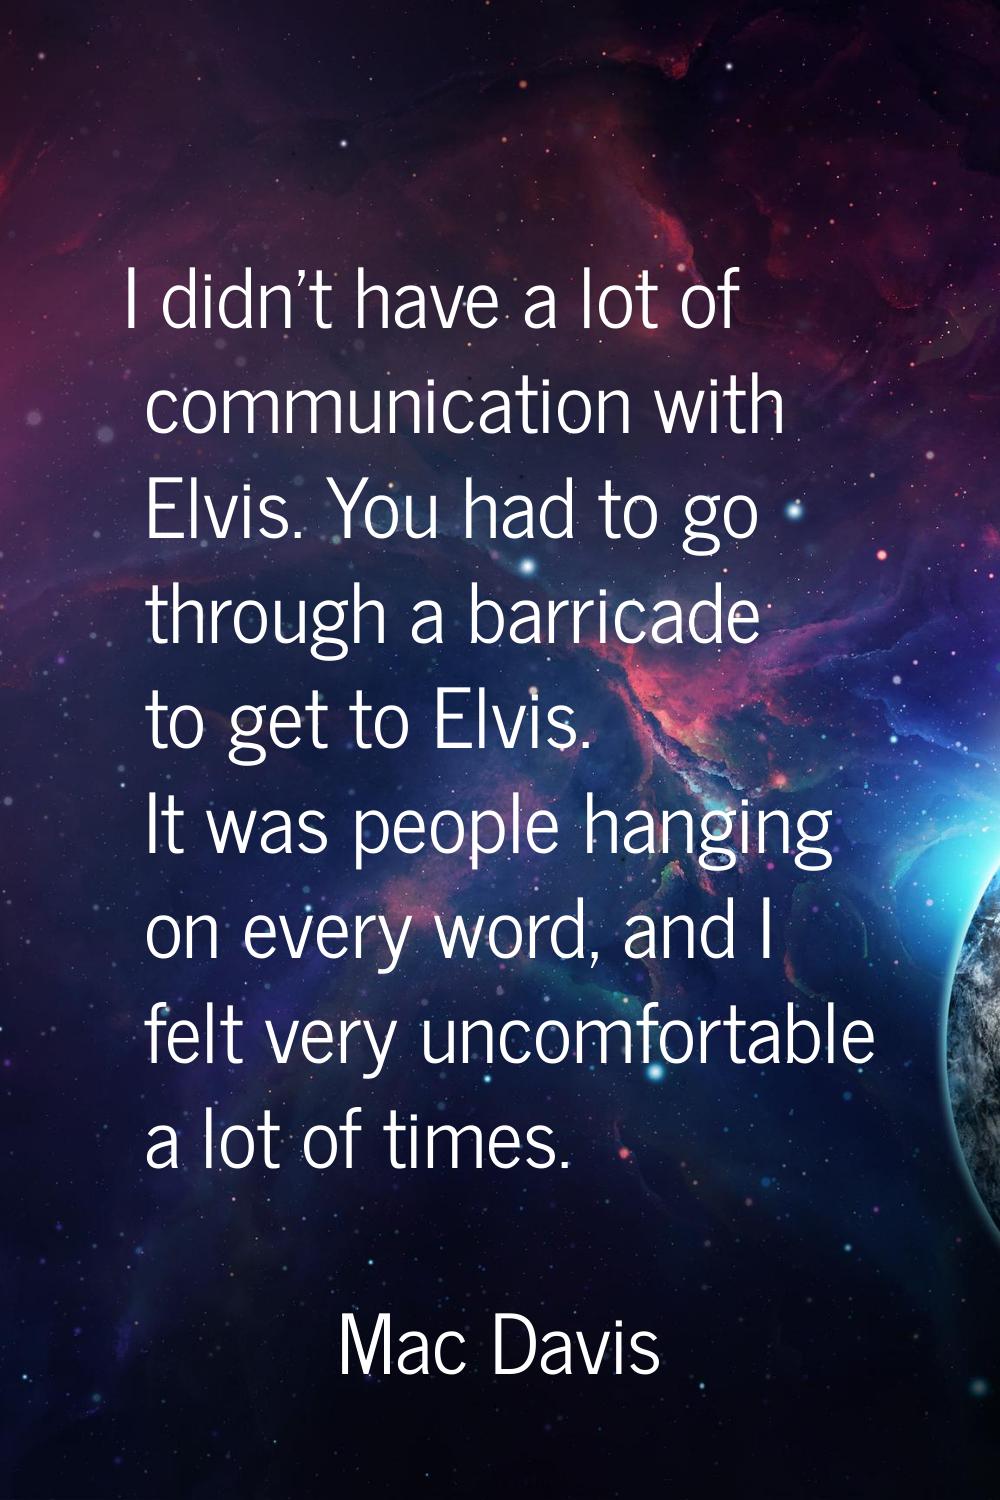 I didn't have a lot of communication with Elvis. You had to go through a barricade to get to Elvis.